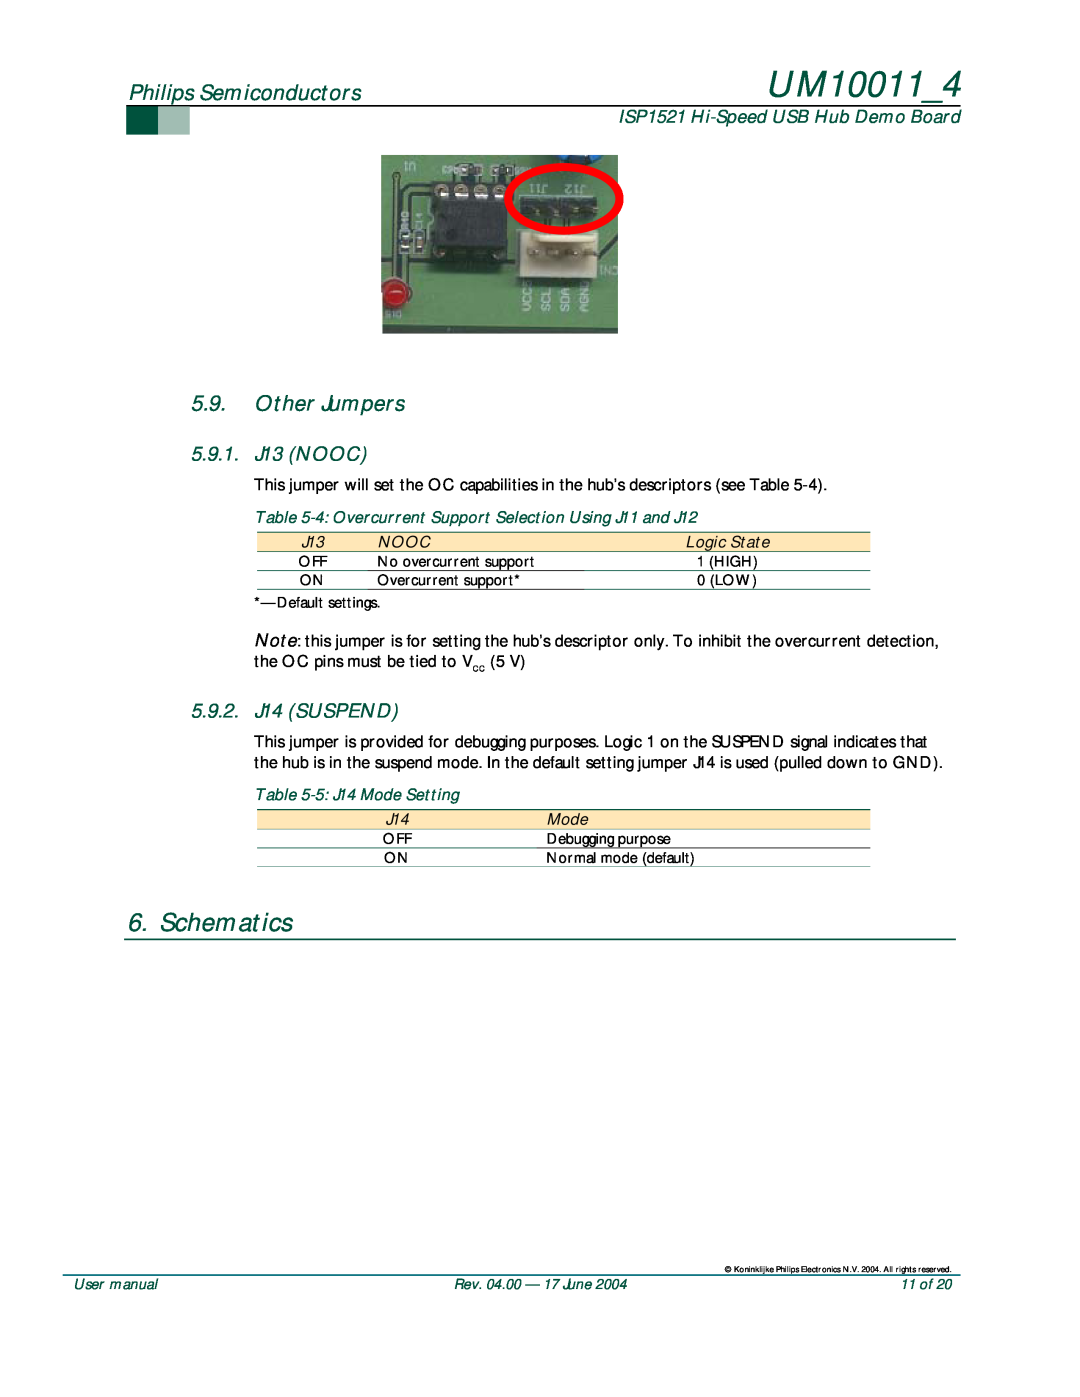 Philips UM10011 user manual Schematics, Other Jumpers, 5.9.1.J13 NOOC, 5.9.2.J14 SUSPEND, Philips Semiconductors 